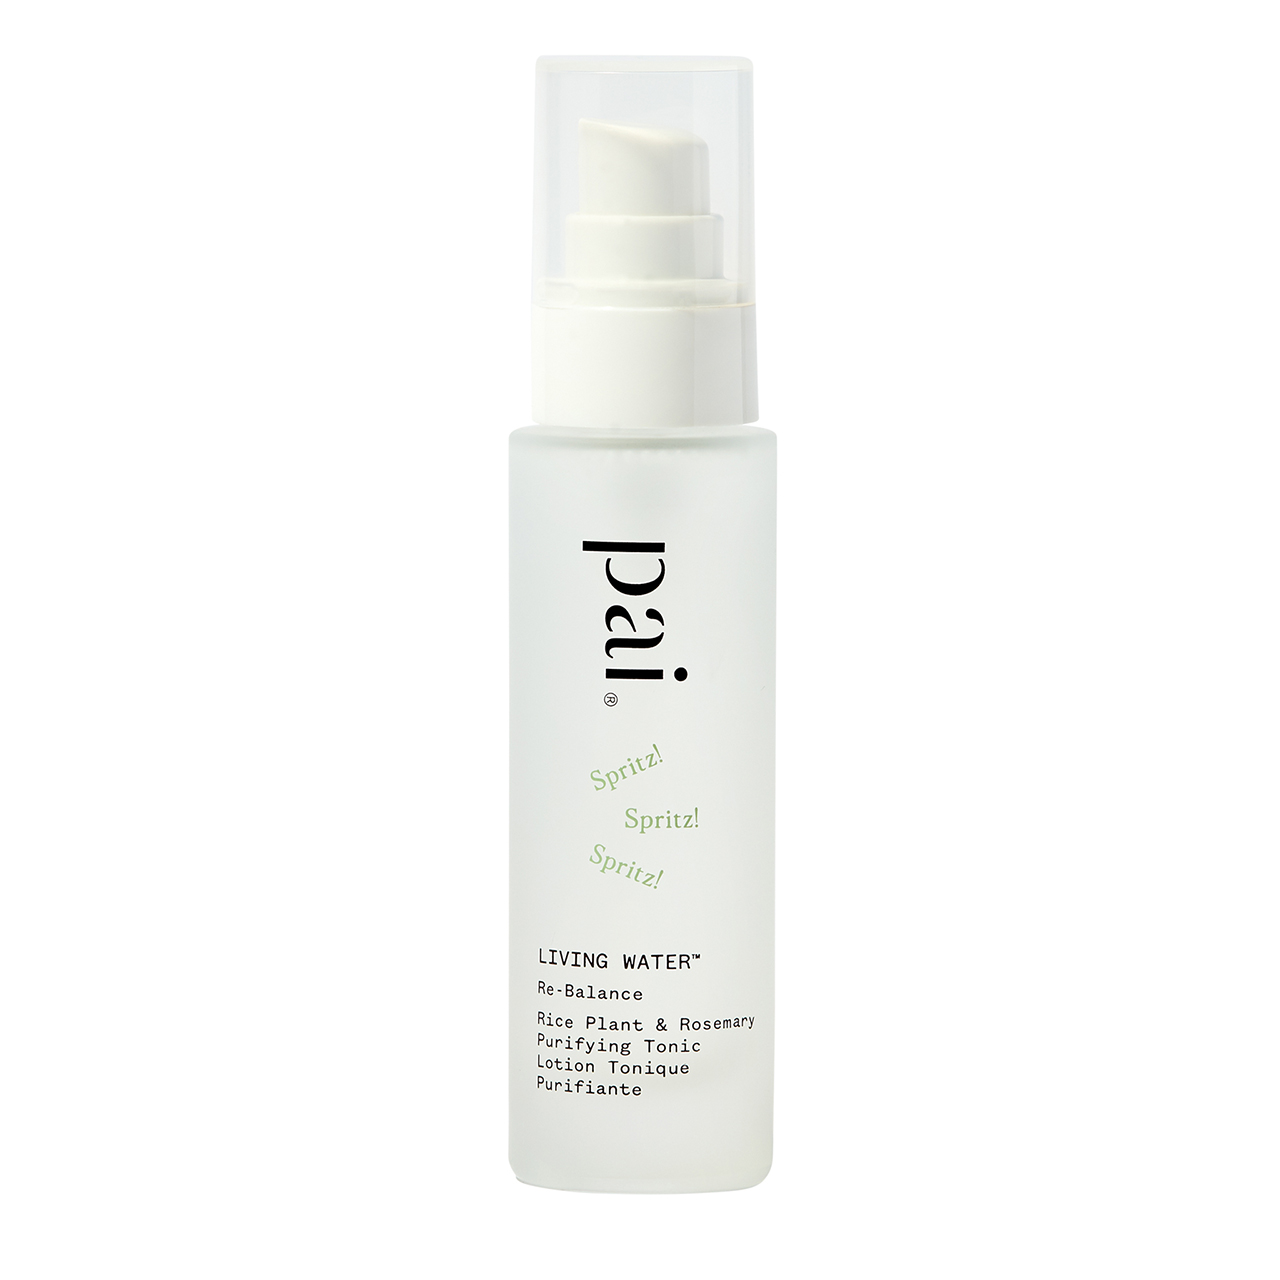 A photo of a bottle of Pai Skincare